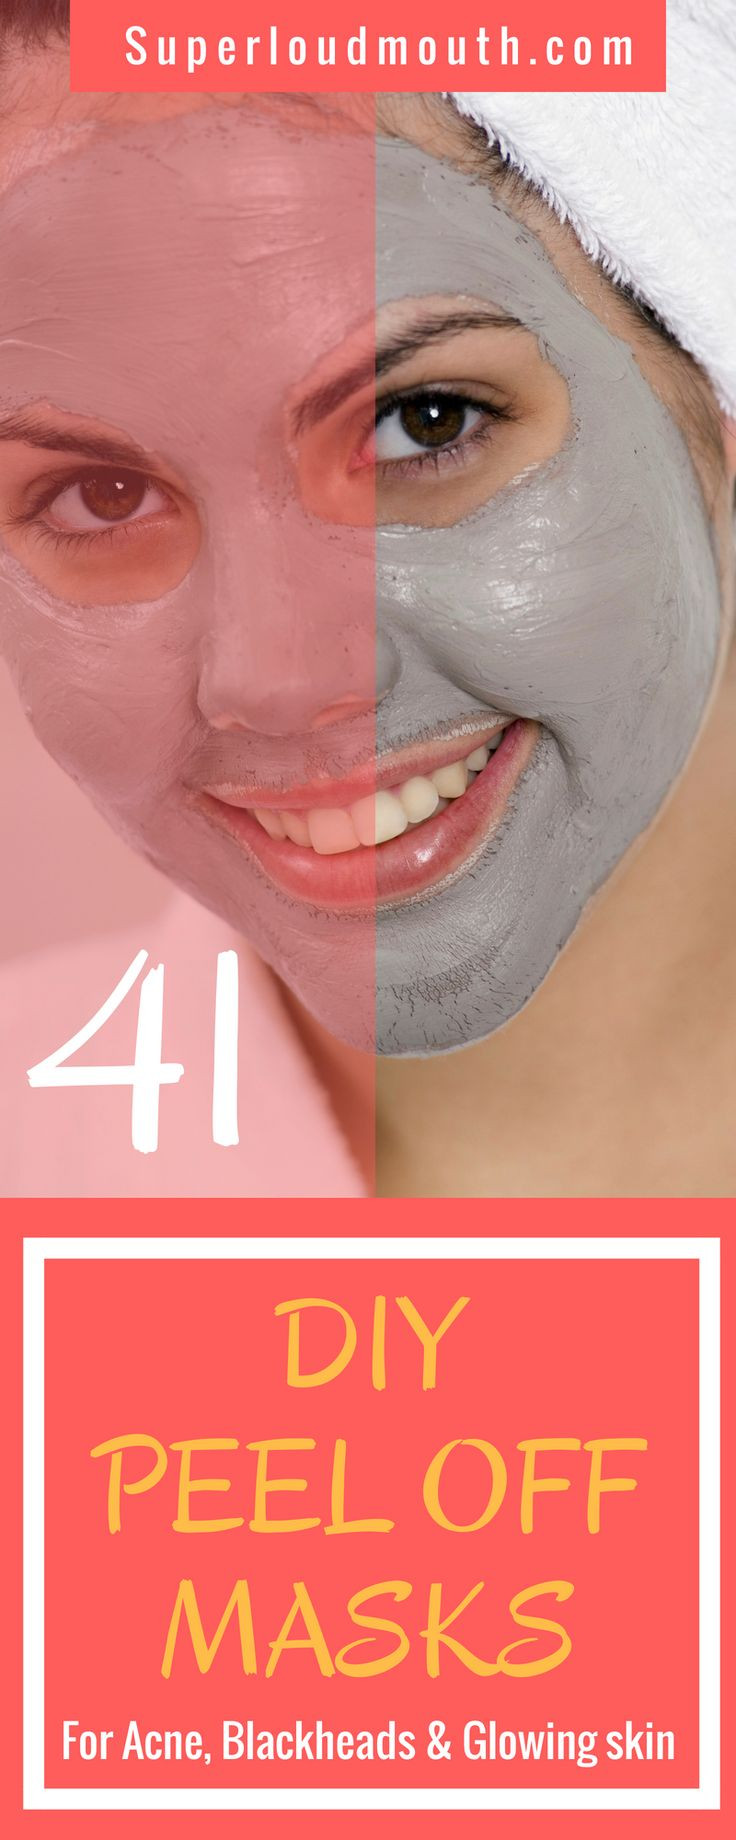 Acne Mask DIY
 41 DIY Peel off Face Masks for Acne Blackheads and